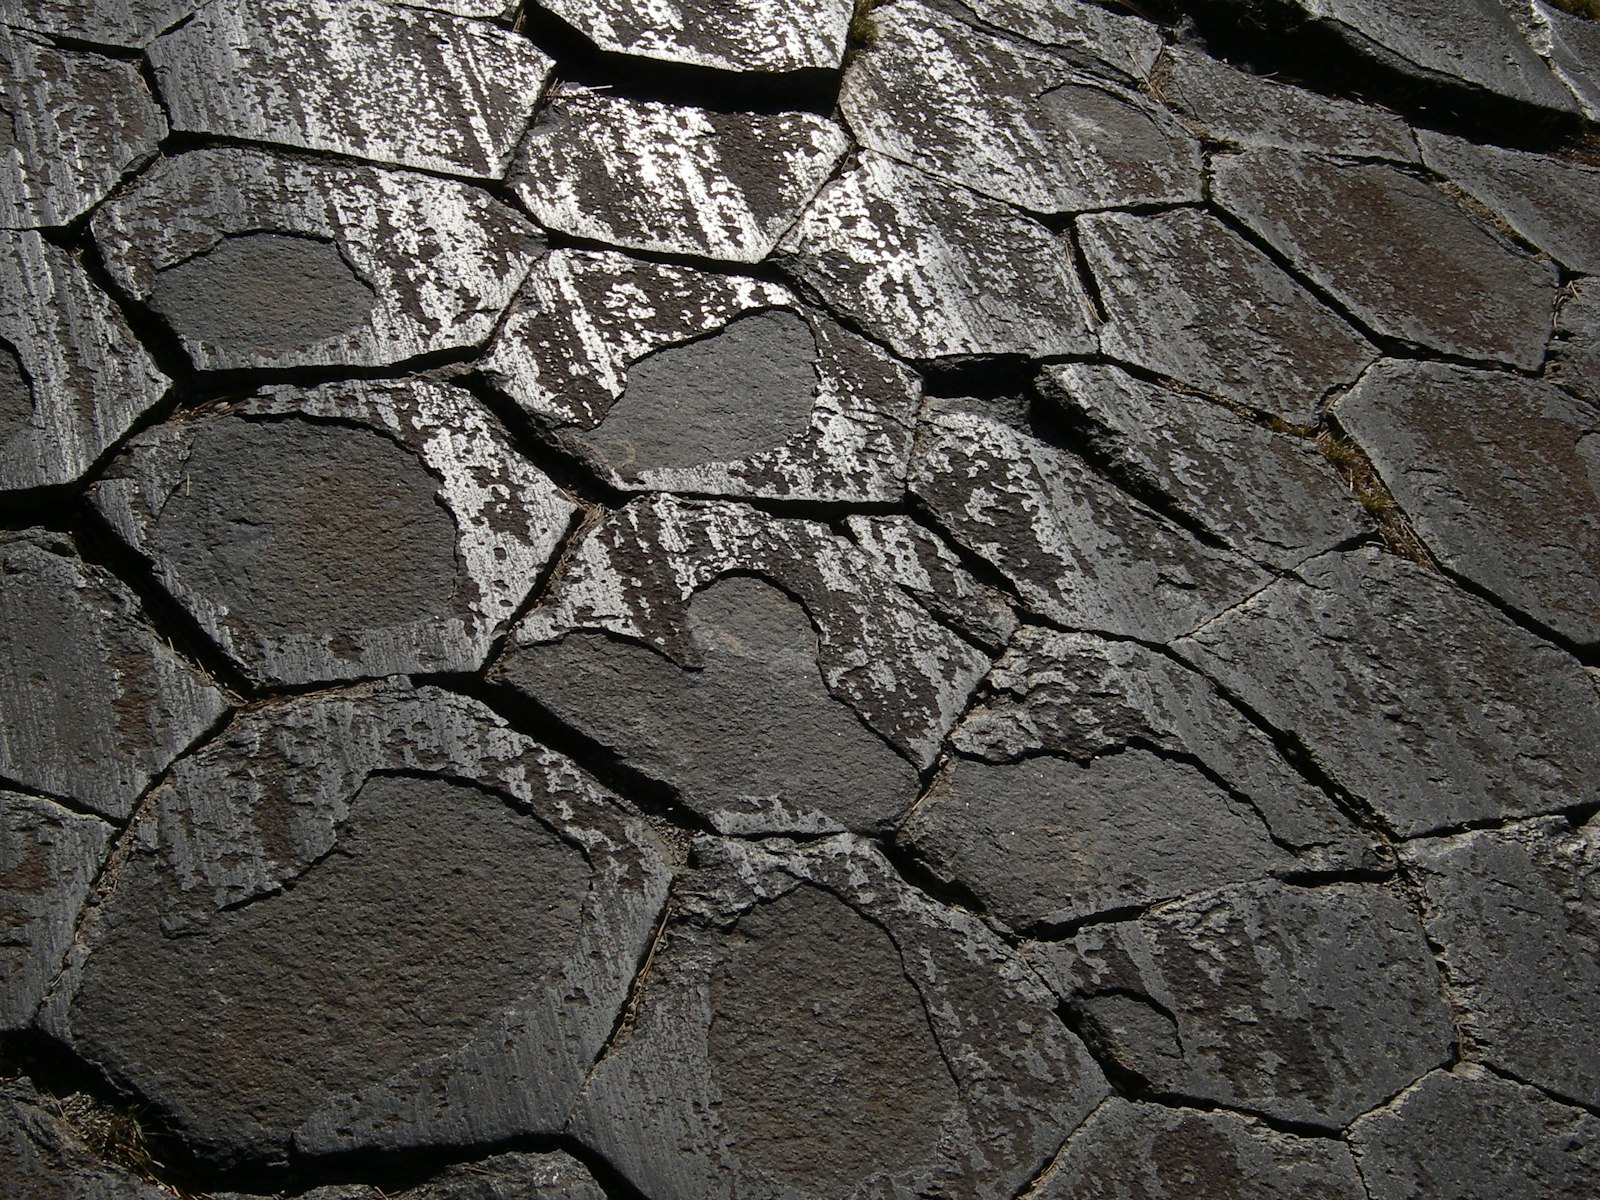 Polished facade of irregularly fractured rock